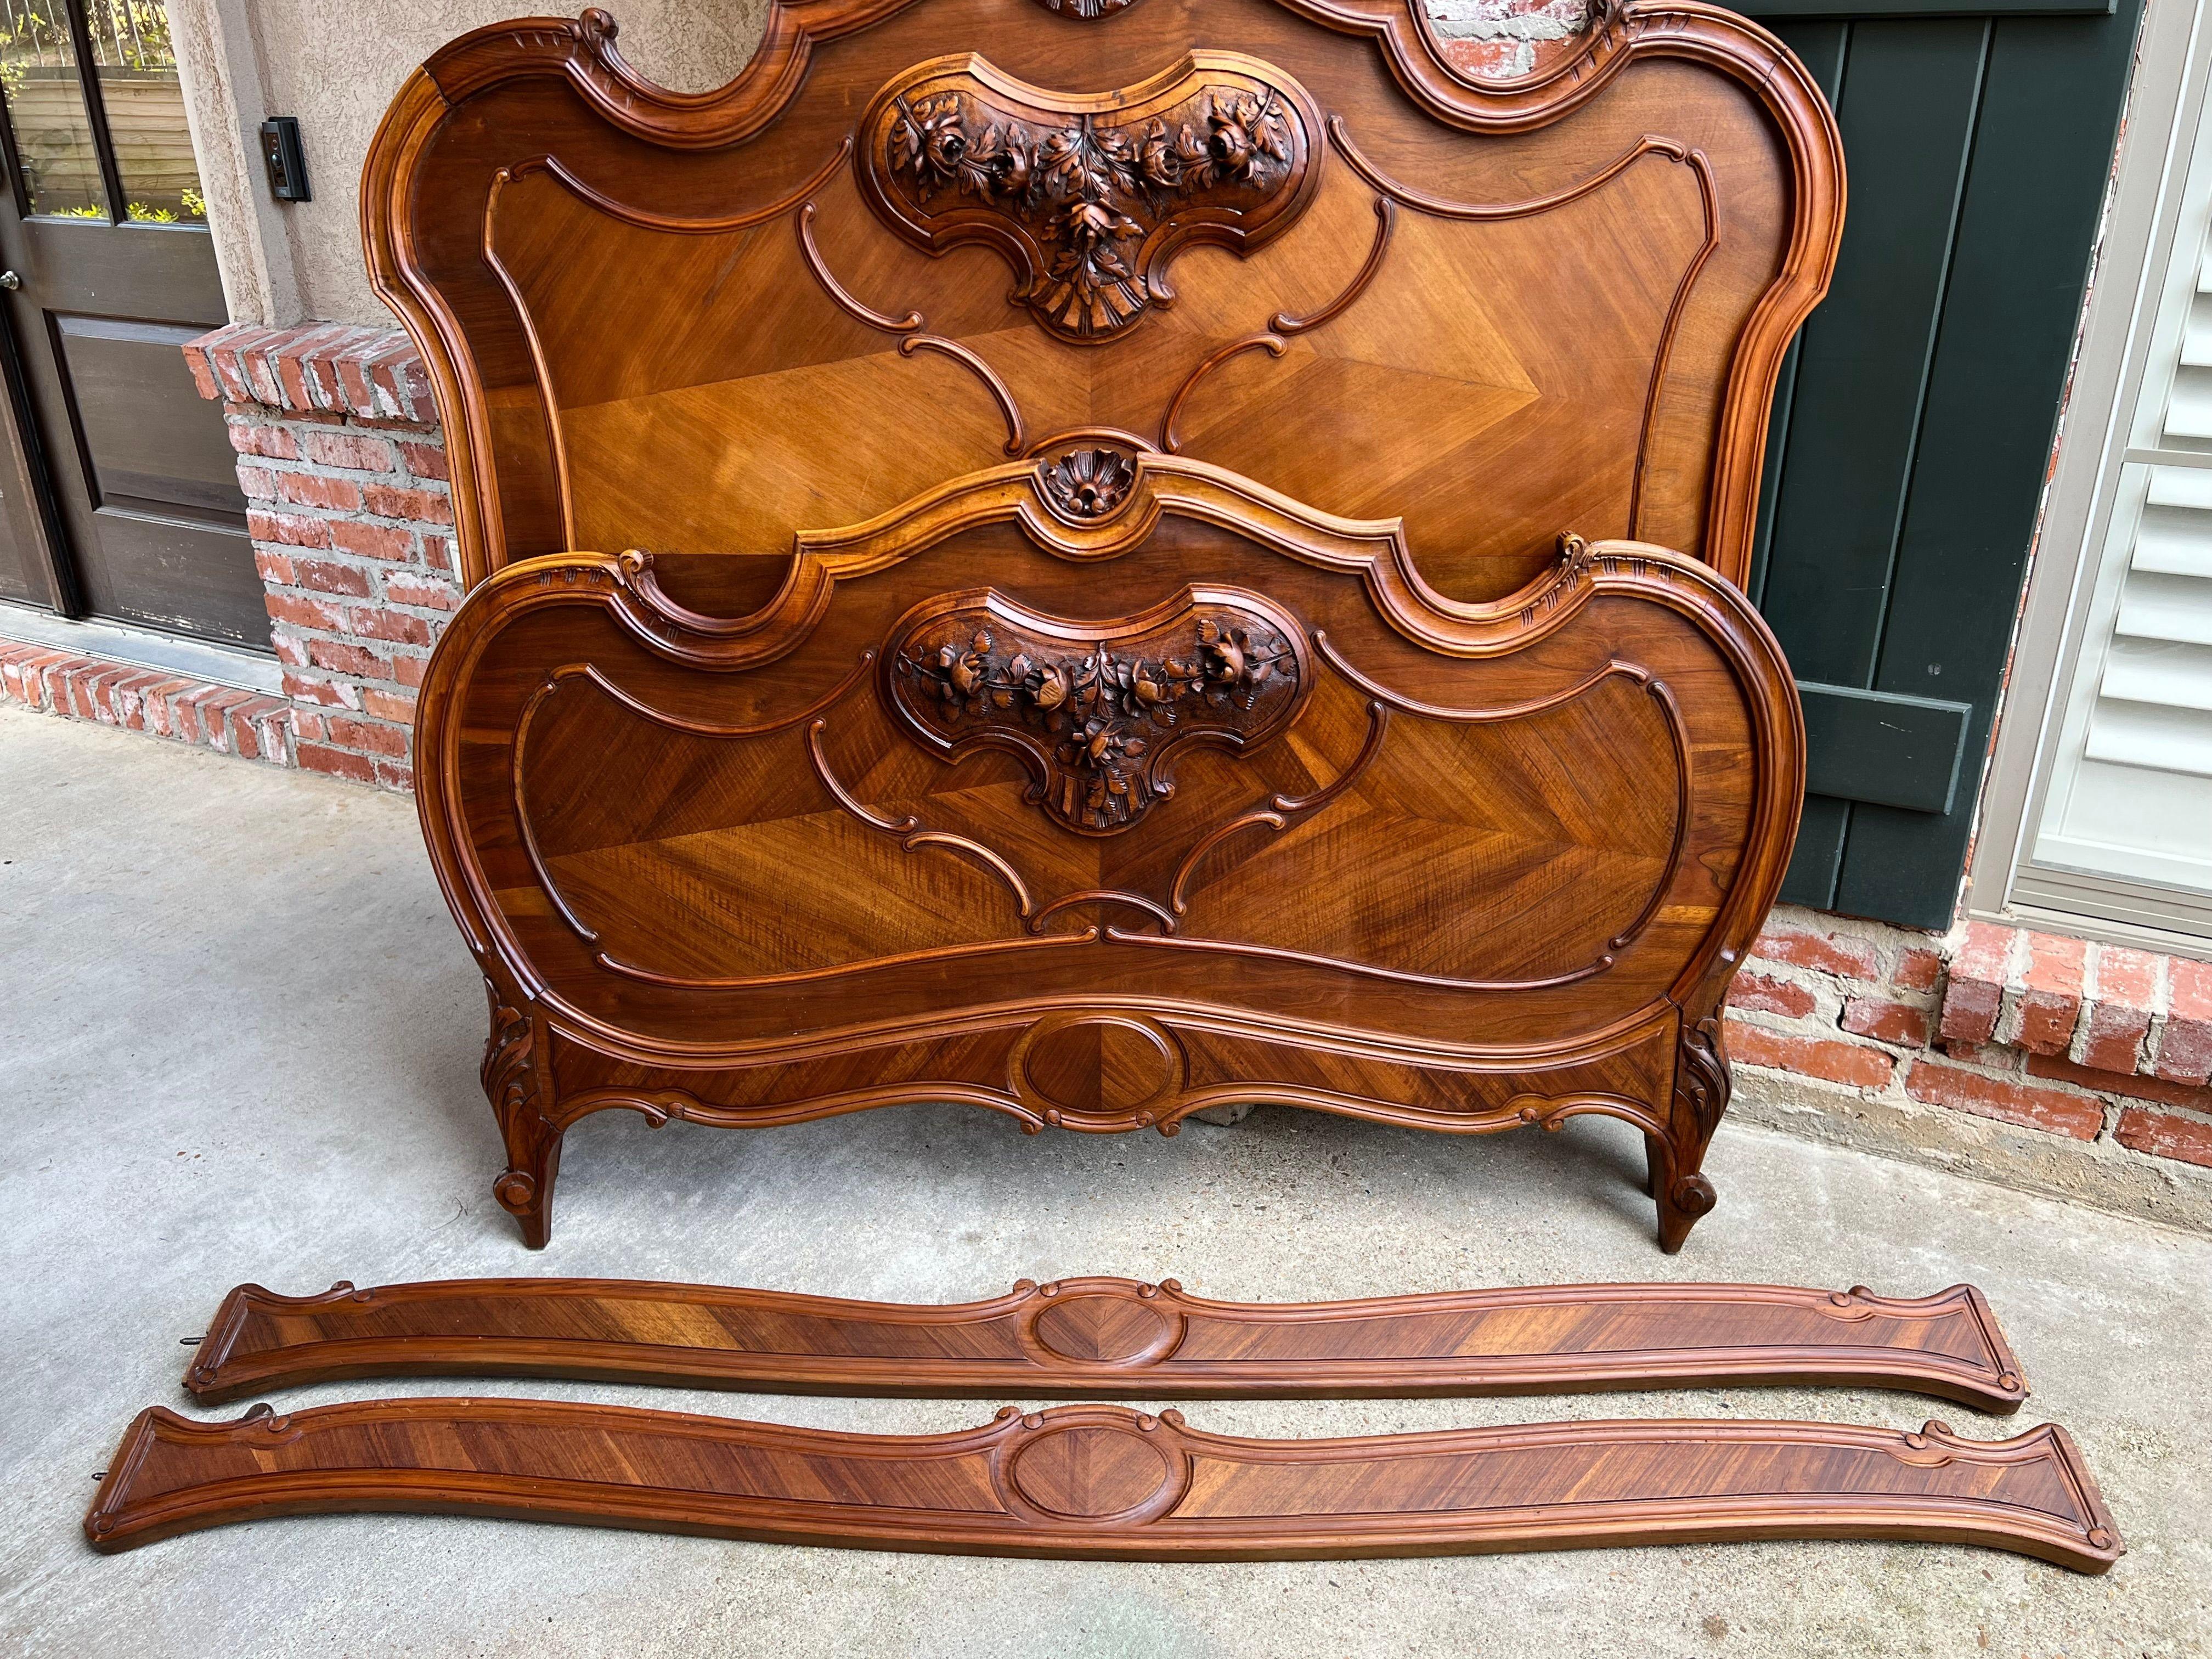 19th century French Louis XV Bed Carved Walnut Rococo European Size with Rails 9